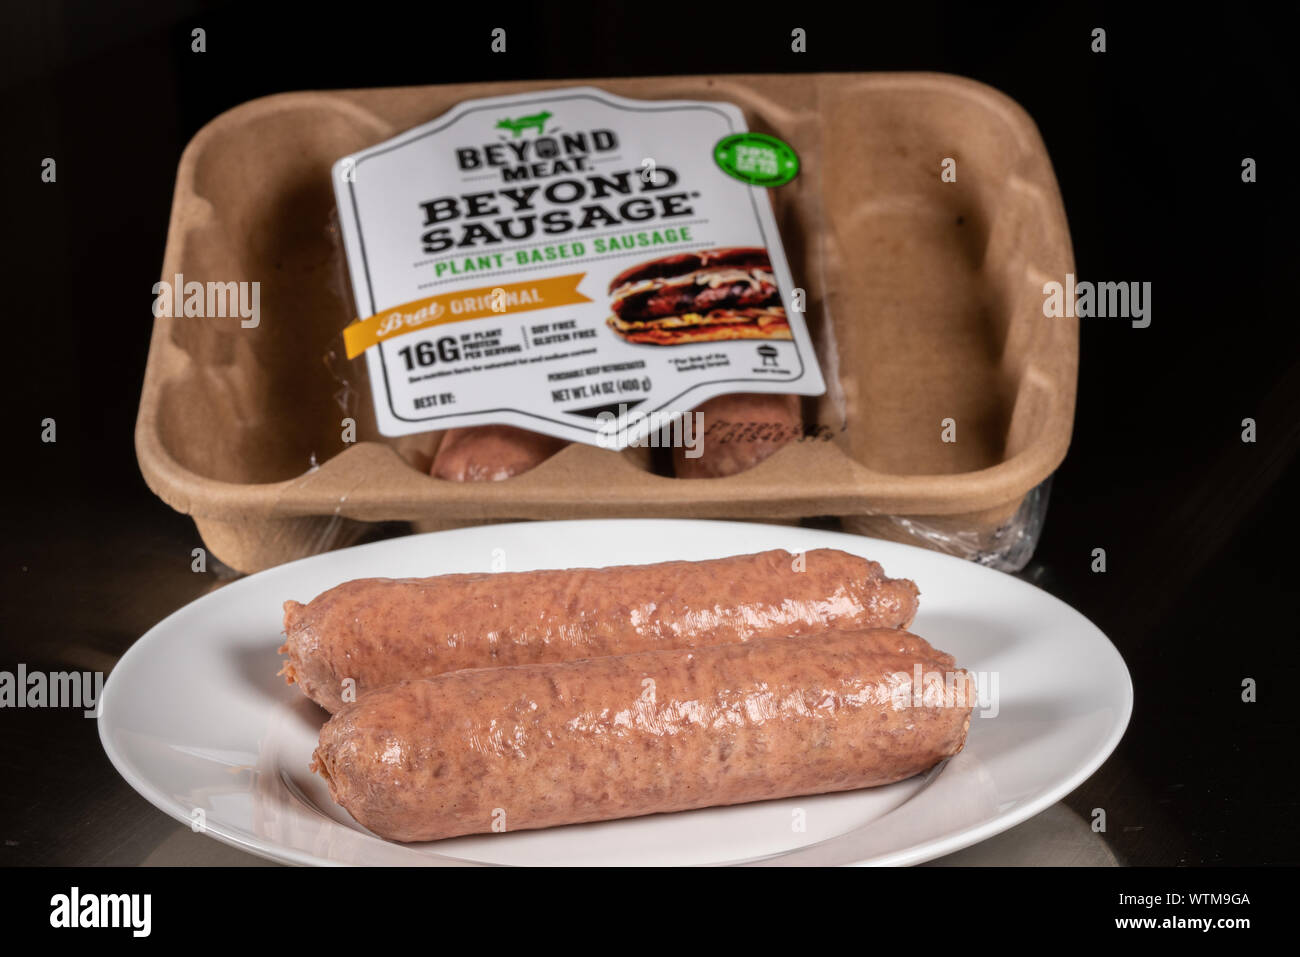 Beyond Meat company sausage known as Beyond Sausage is a vegetable plant based sausage now on sale in the USA and at McDonalds Stock Photo